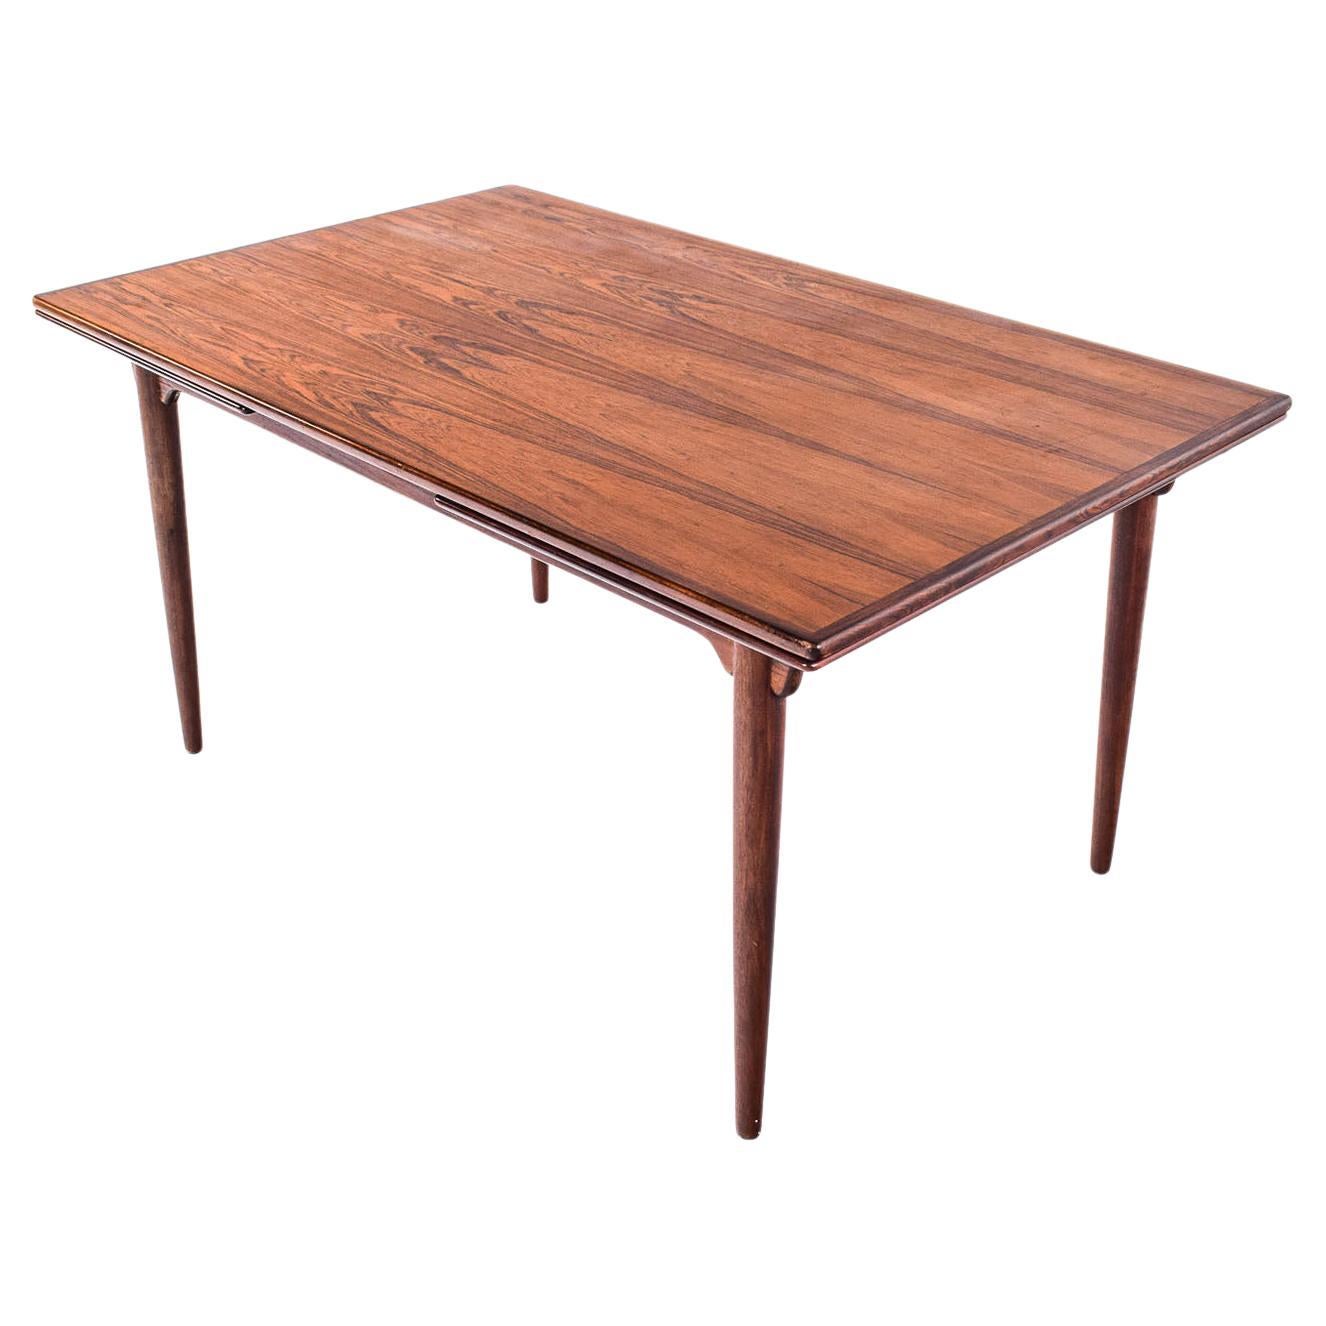 Gunni Omann Dining Table in Rosewood, Model 54, 1960’s